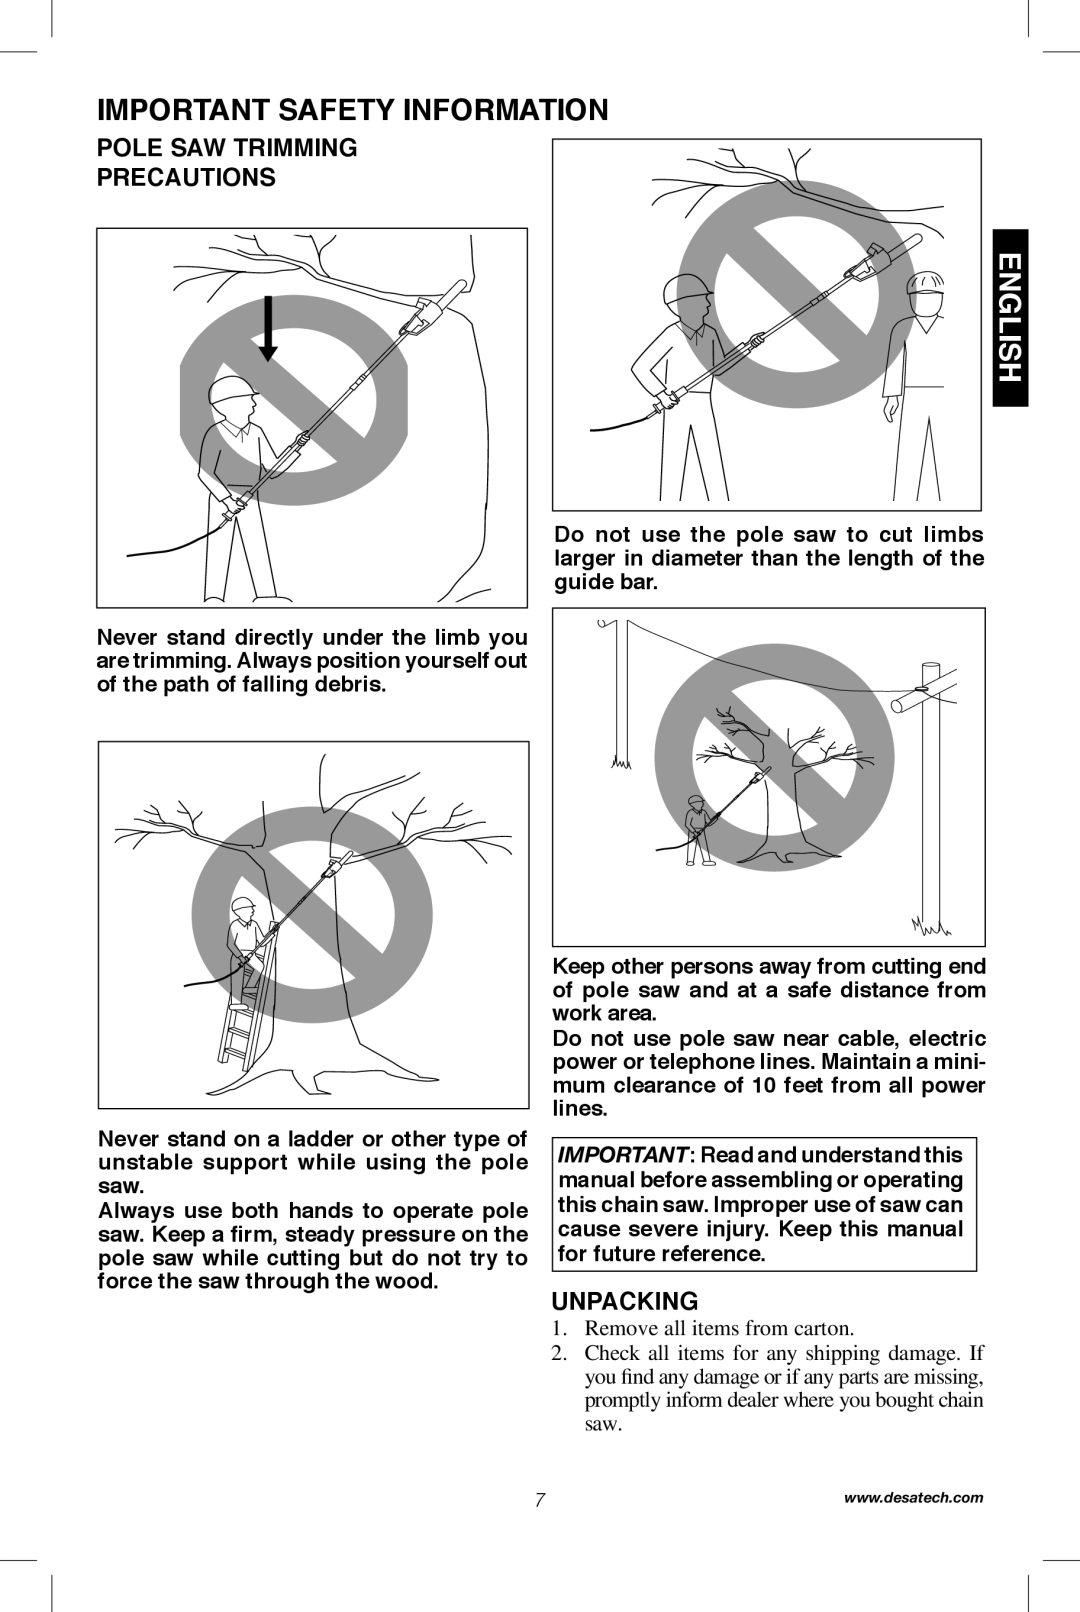 Remington Power Tools 104317, PS1510A iMPORTANT SAFETY INFORMATION, English, Pole Saw Trimming Precautions, Unpacking 